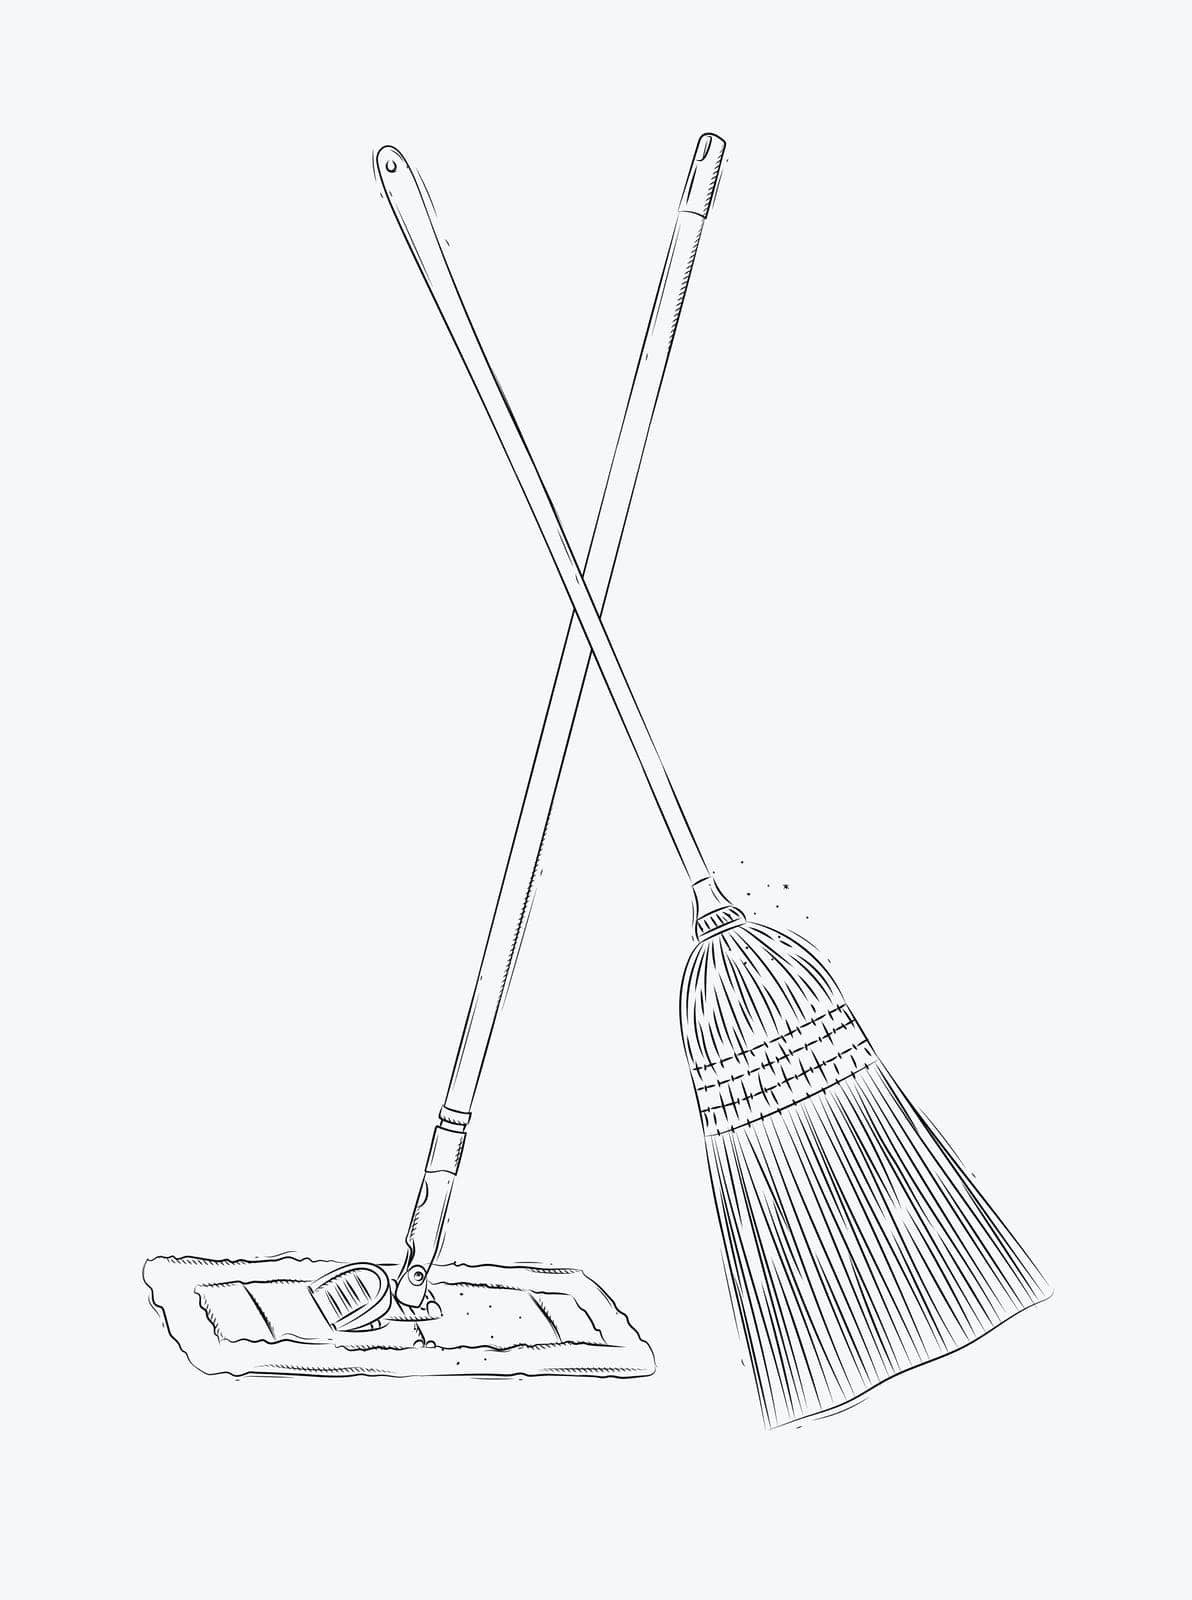 Broom and flat mop by anna42f